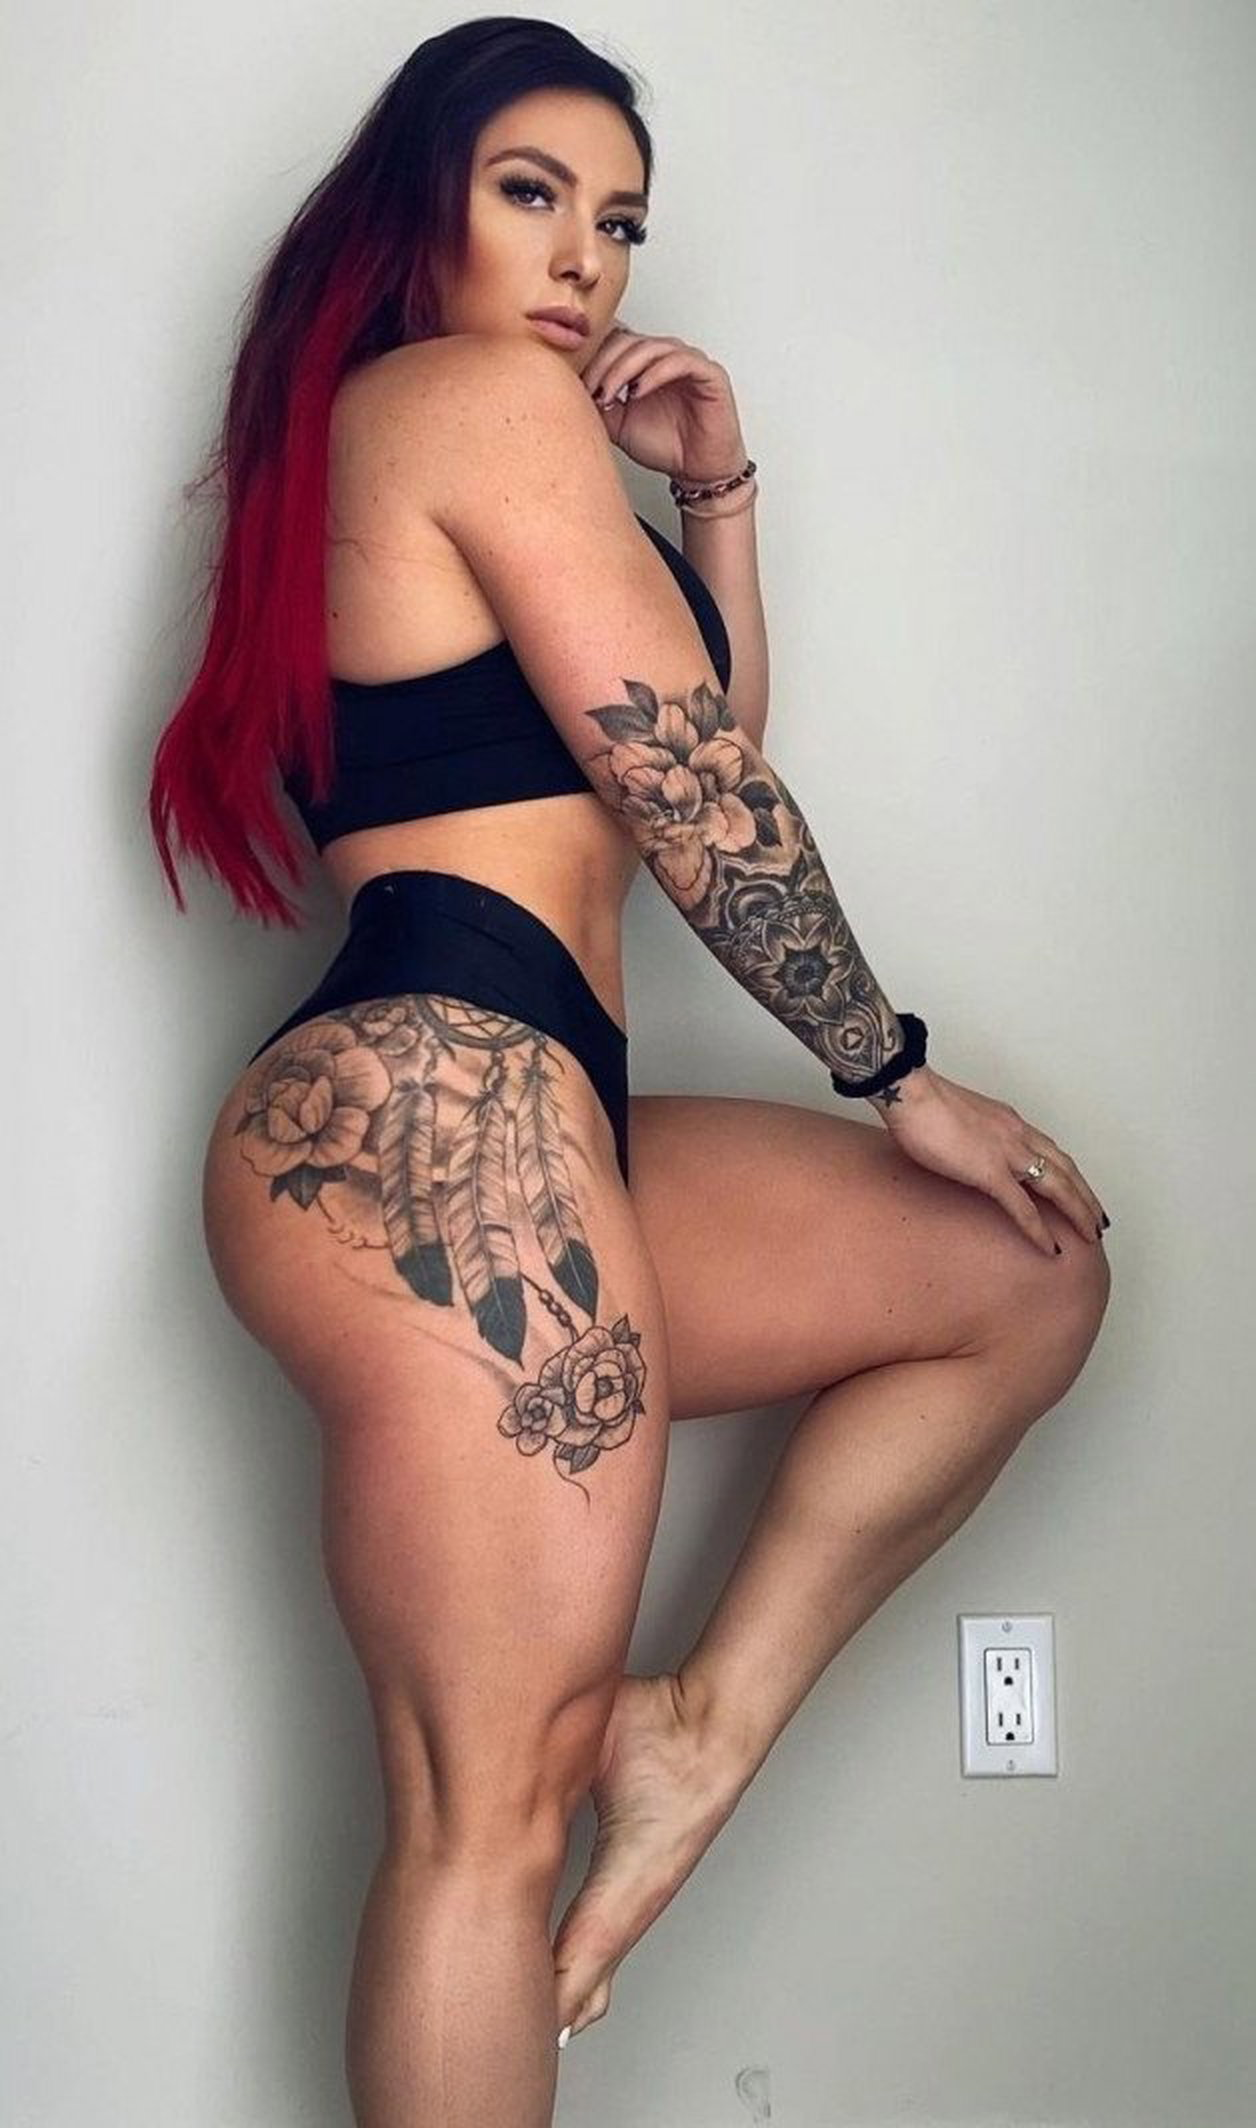 Photo by Ruinedcarpet with the username @Ruinedcarpet,  August 14, 2022 at 10:00 AM. The post is about the topic Alt Girls; Tattoo, Piercing & Co and the text says 'Kayla Rossi.

#KaylaRossi #Hot #Fit #Cute #Alternative #ProWrestler #Strong #Amazon #Underwear #Homemade #Possing #Tattoo #DyedHair #Ink #Beauty #Fitness #GymBody #Model #Hottie #GfMaterial #FitGirl #Cutie #AltGirl #WomensWrestling #BlackUnderwear..'